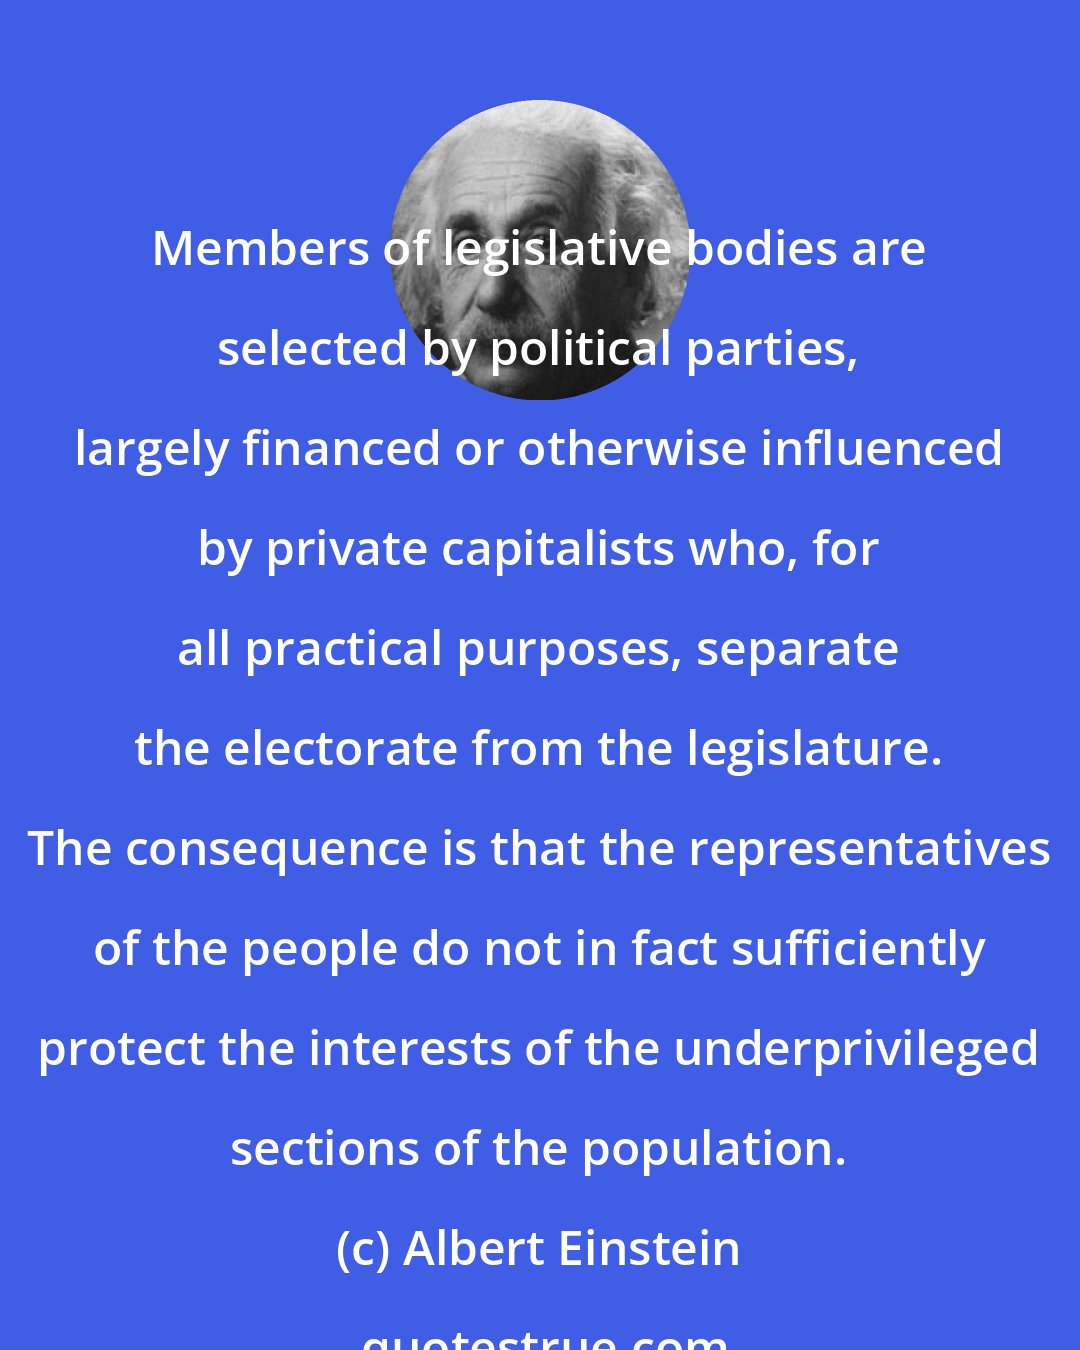 Albert Einstein: Members of legislative bodies are selected by political parties, largely financed or otherwise influenced by private capitalists who, for all practical purposes, separate the electorate from the legislature. The consequence is that the representatives of the people do not in fact sufficiently protect the interests of the underprivileged sections of the population.